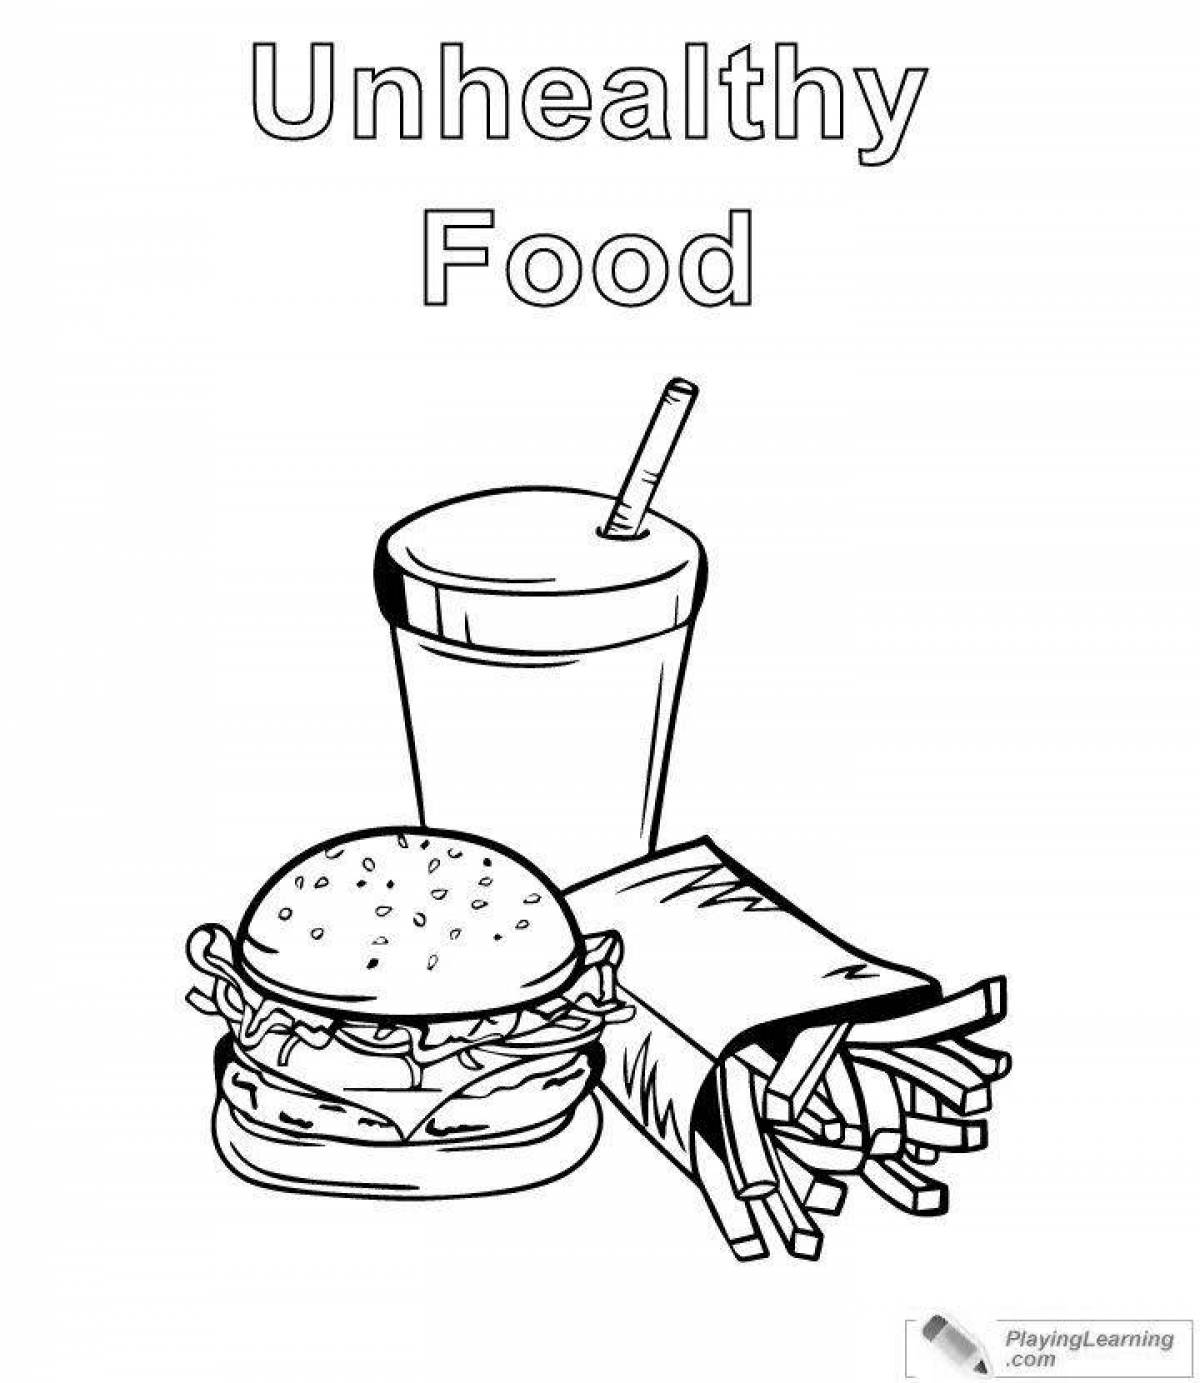 Coloring page fresh burger and french fries